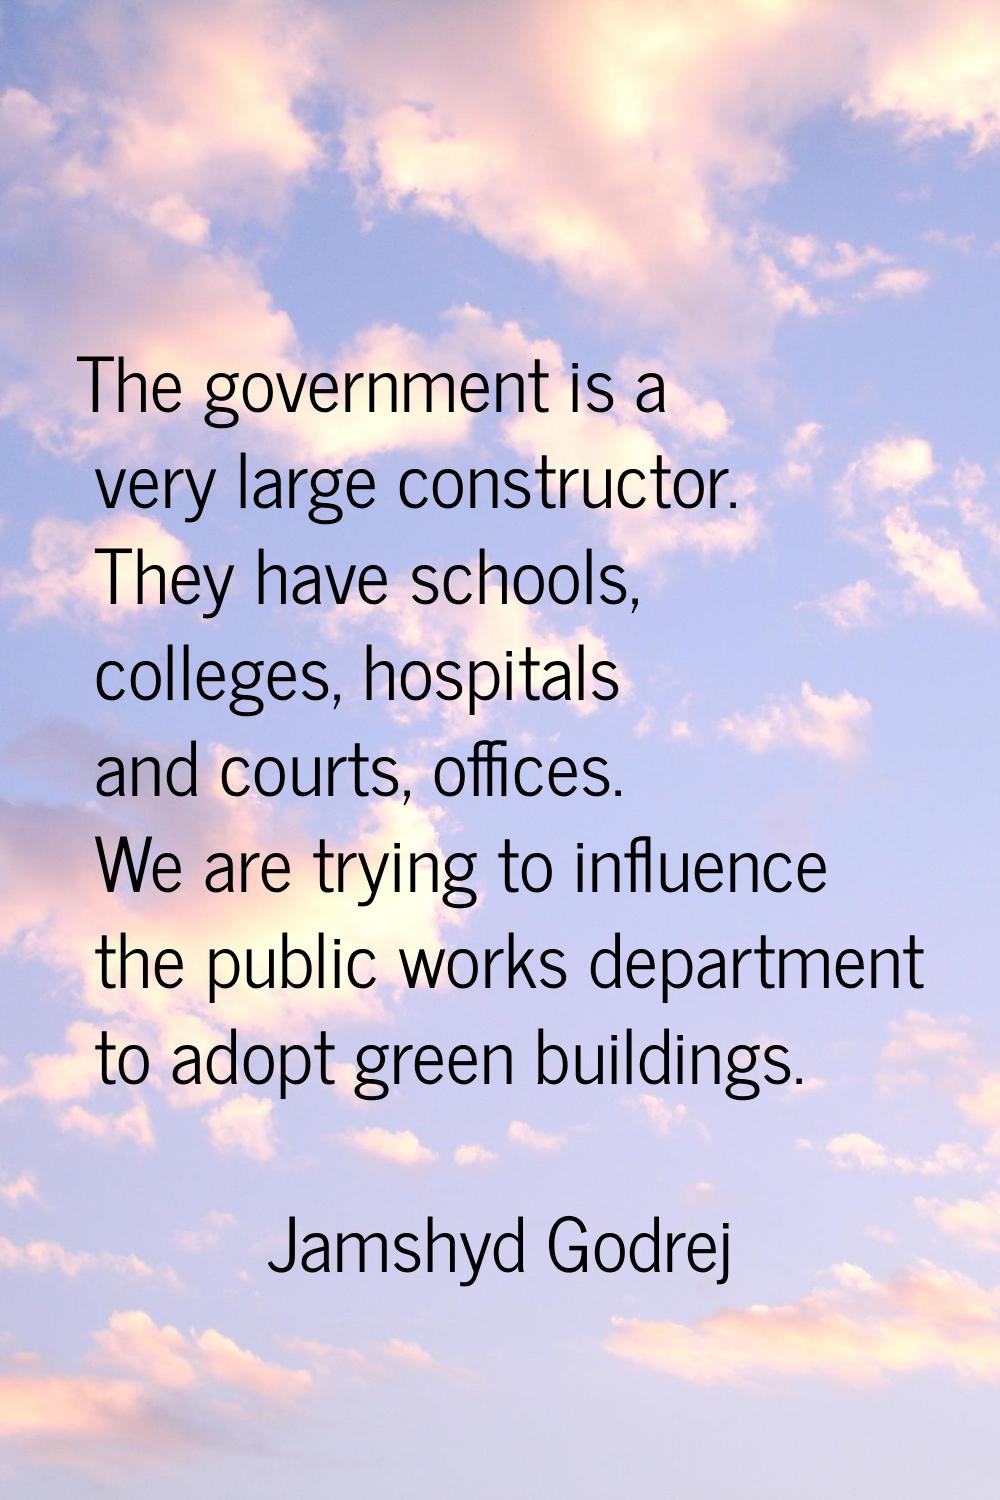 The government is a very large constructor. They have schools, colleges, hospitals and courts, offi